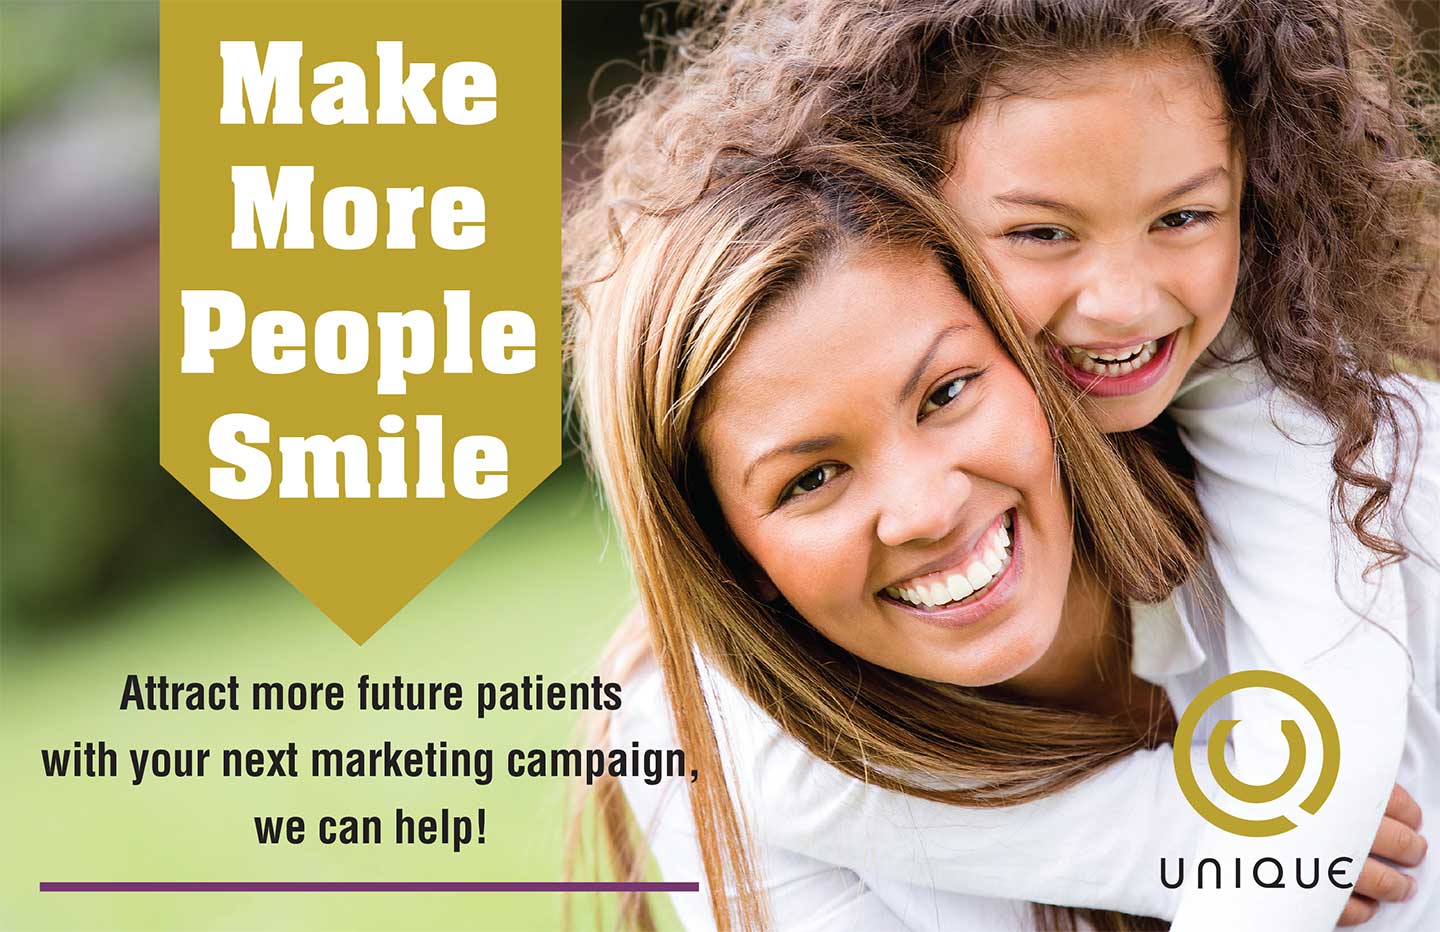 Make More People Smile. Attract more future patients with your next marketing campaign. Unique can help!